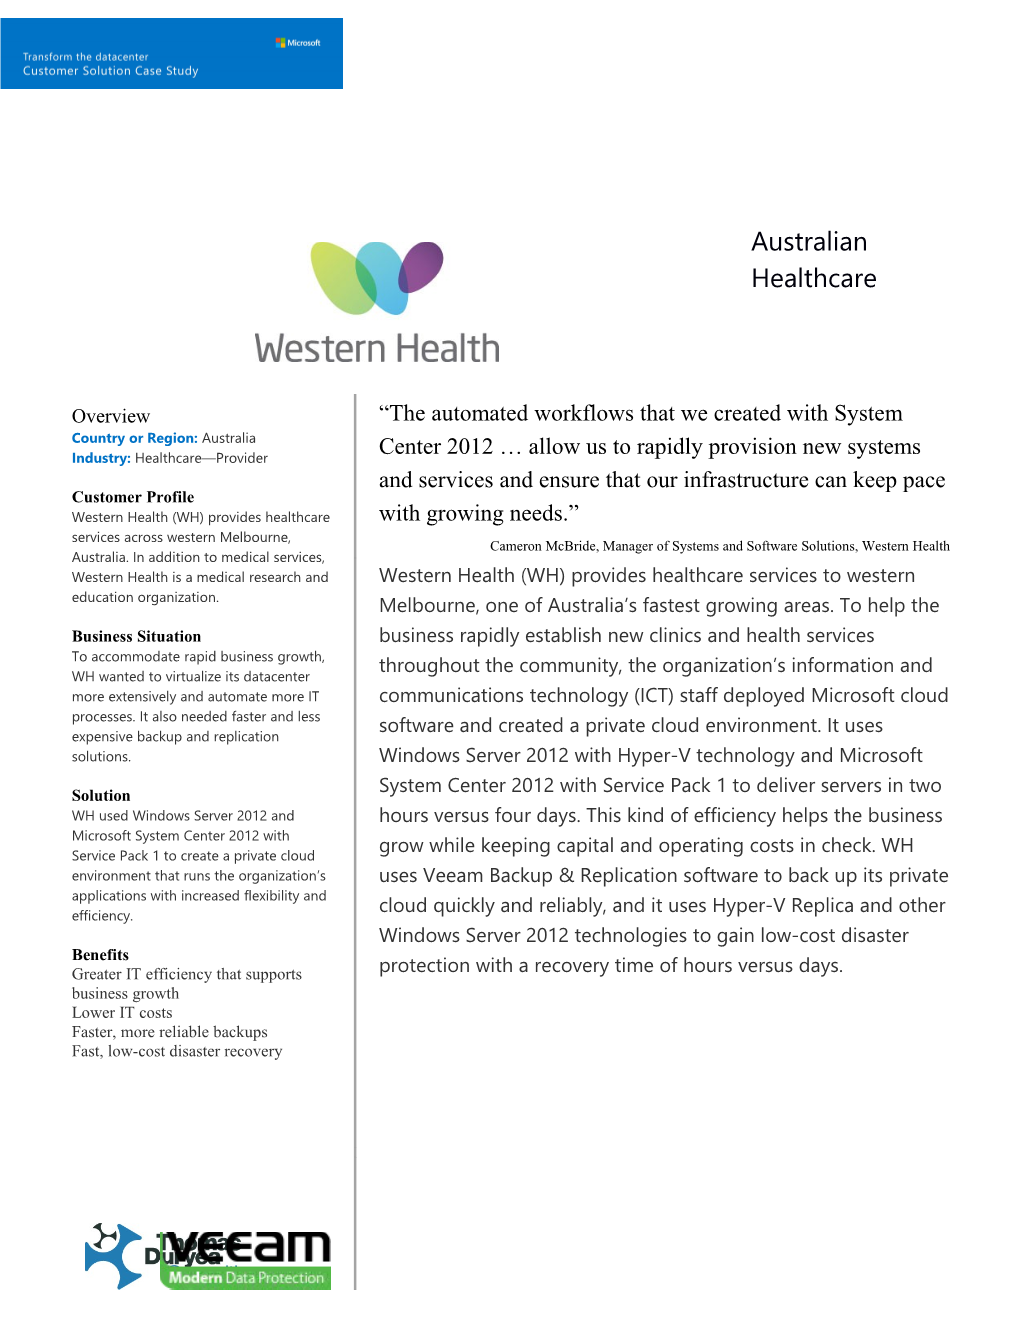 Western Health (WH) Is a Major Metropolitan Health Service Network That Supports the Western